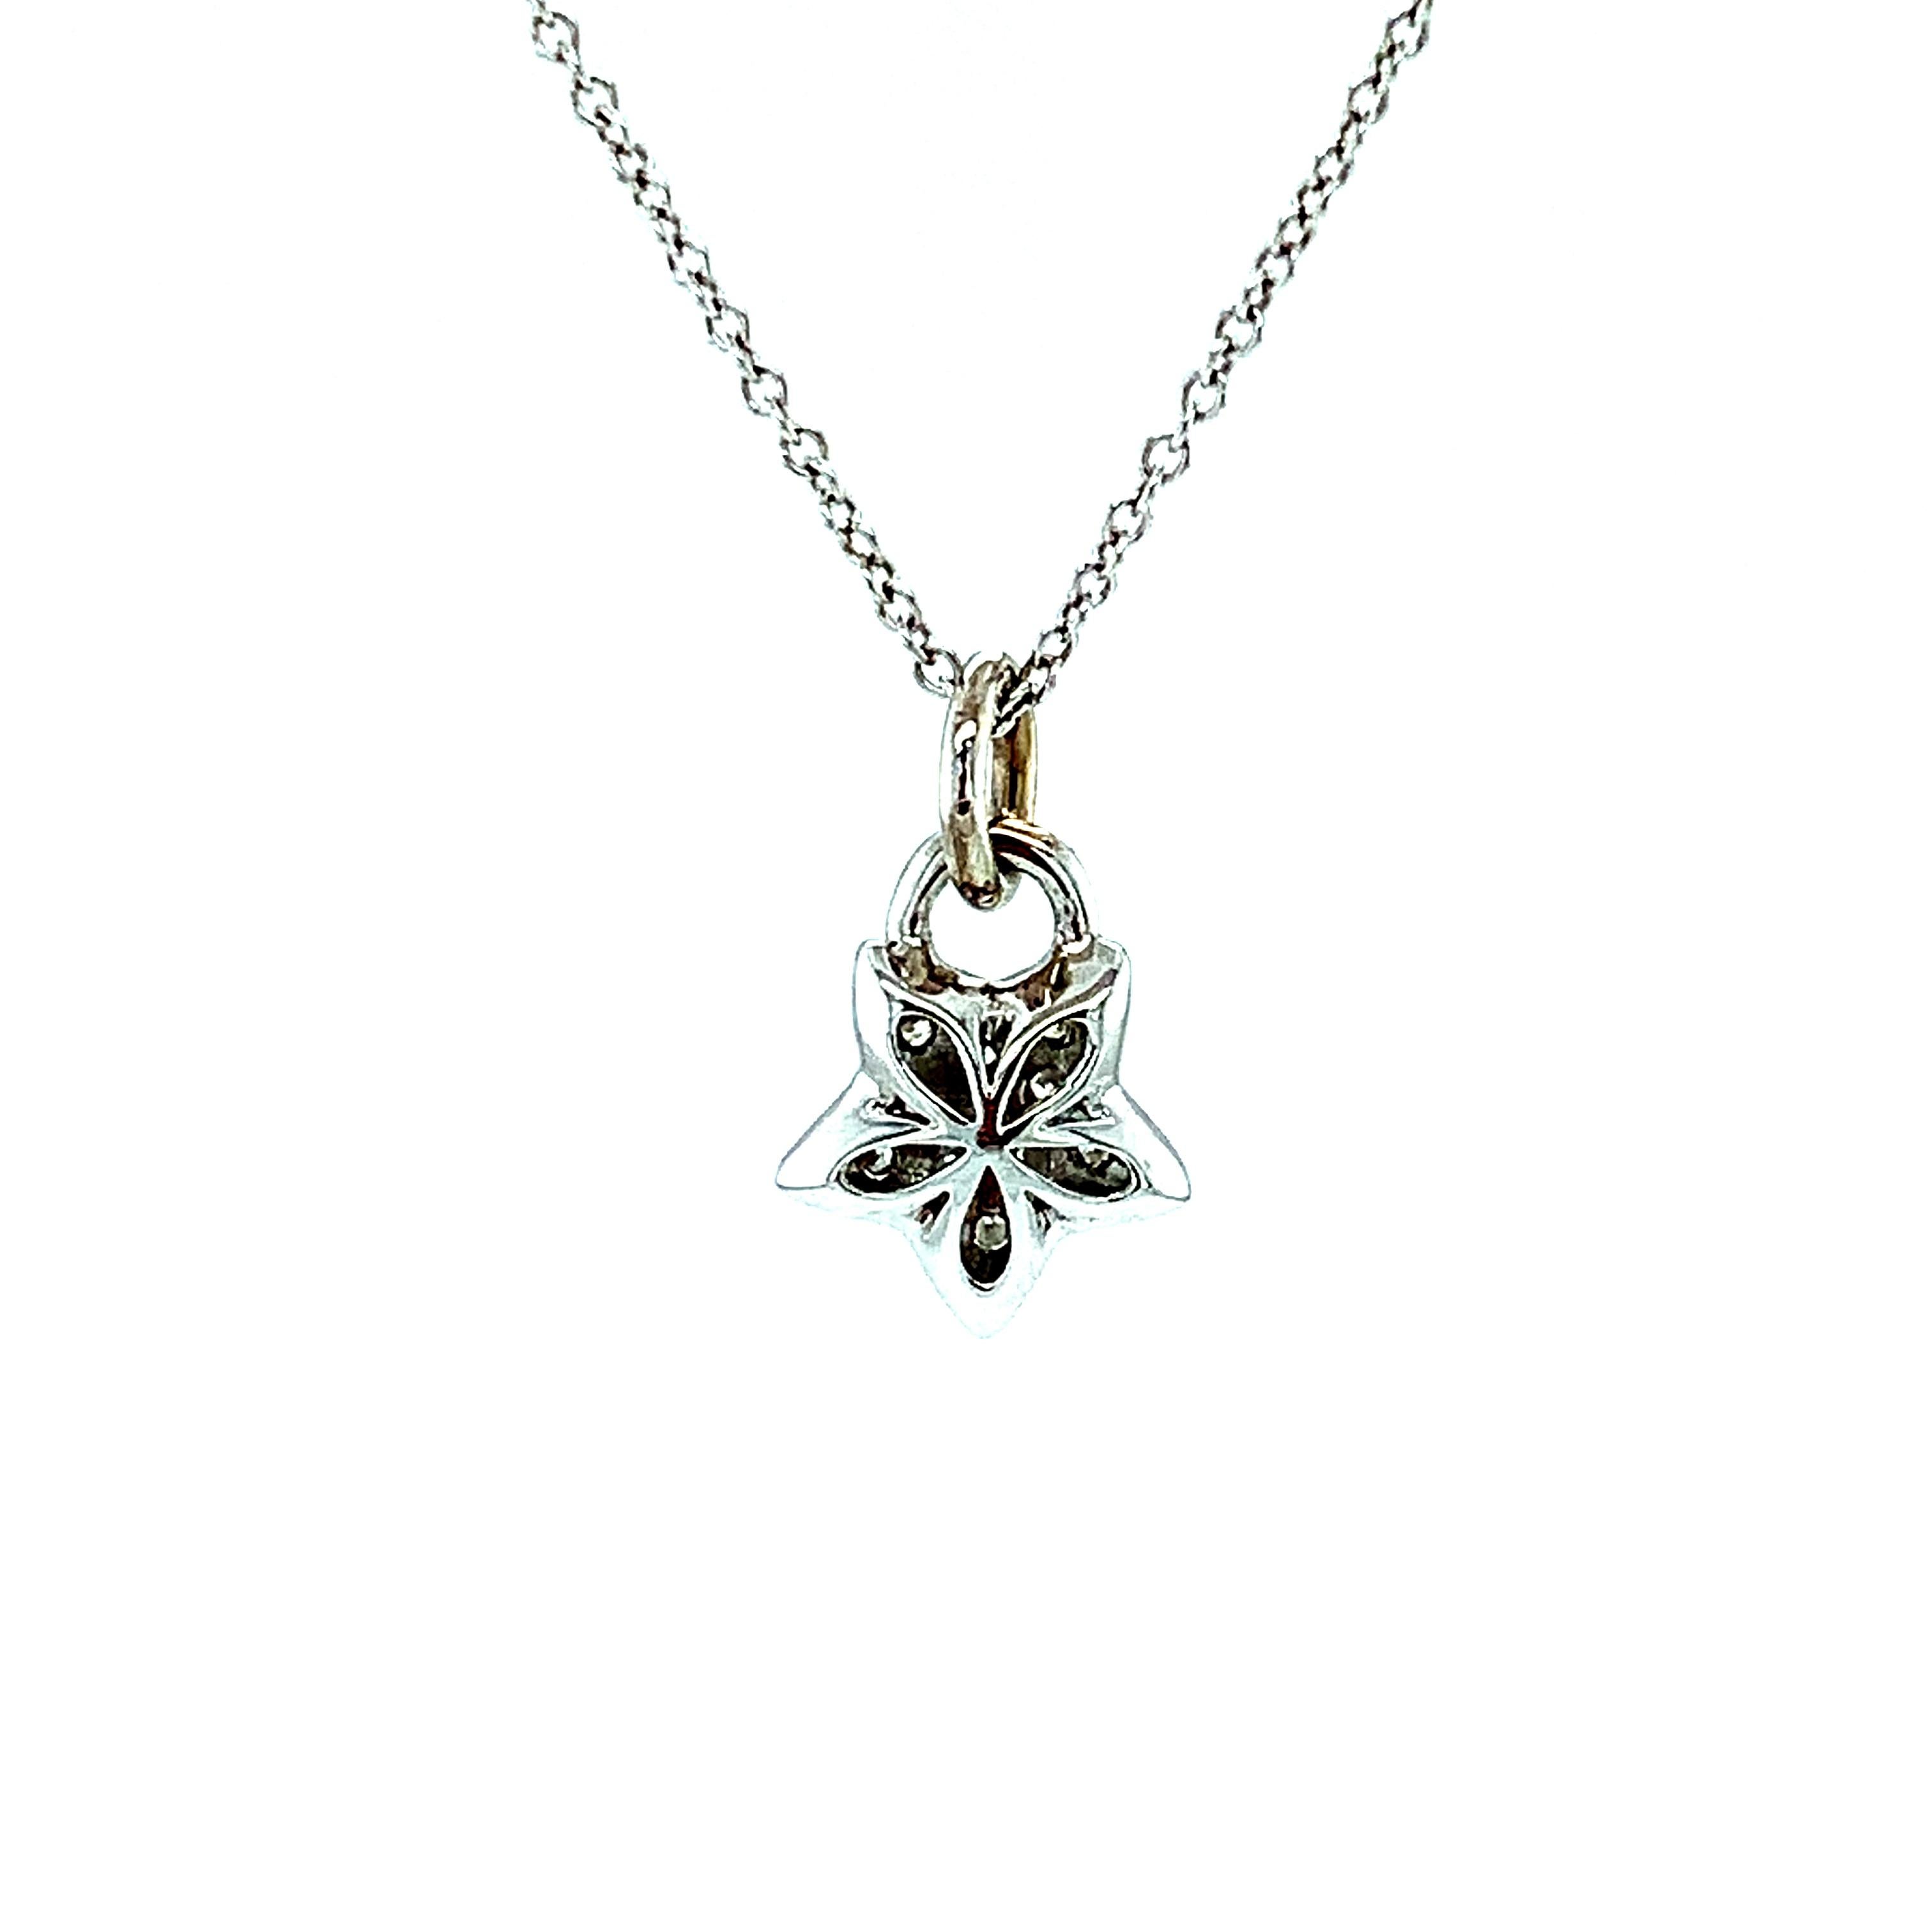 Artisan Diamond and White Gold Dancing Star Pendant Necklace with Chain